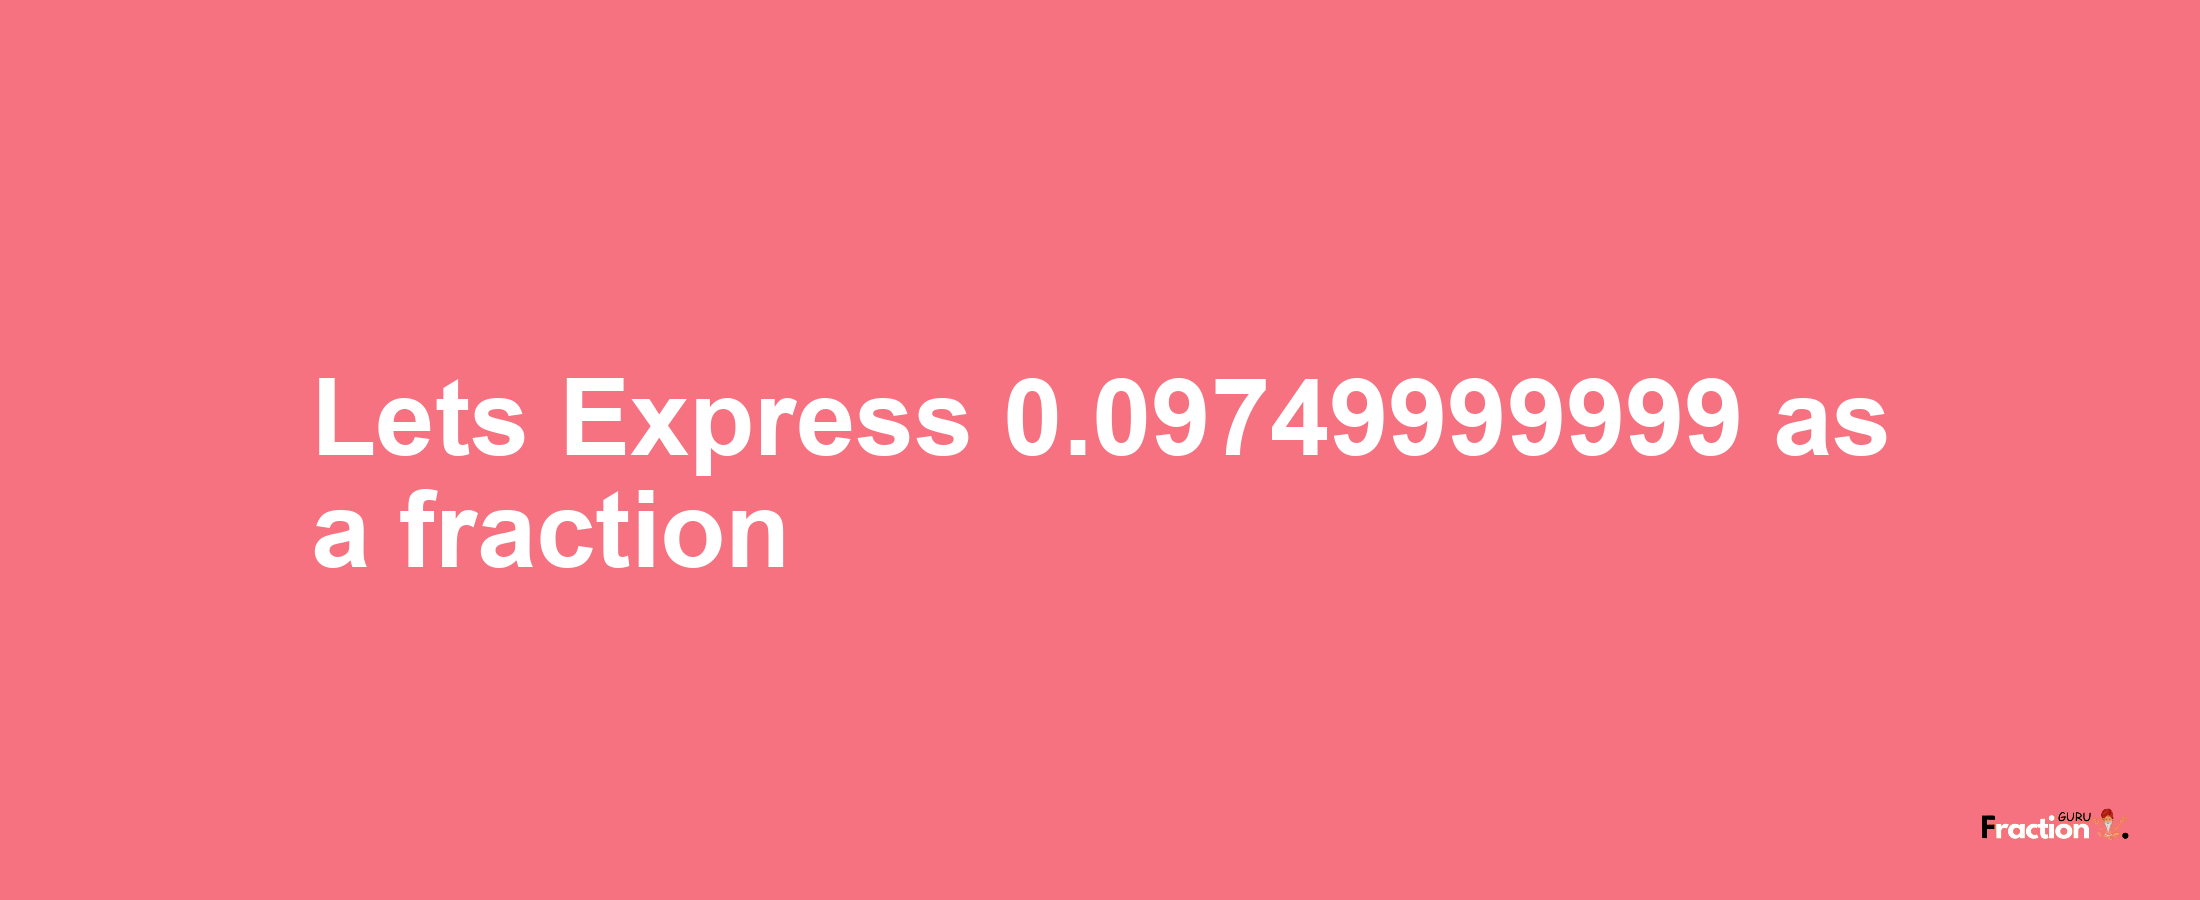 Lets Express 0.09749999999 as afraction